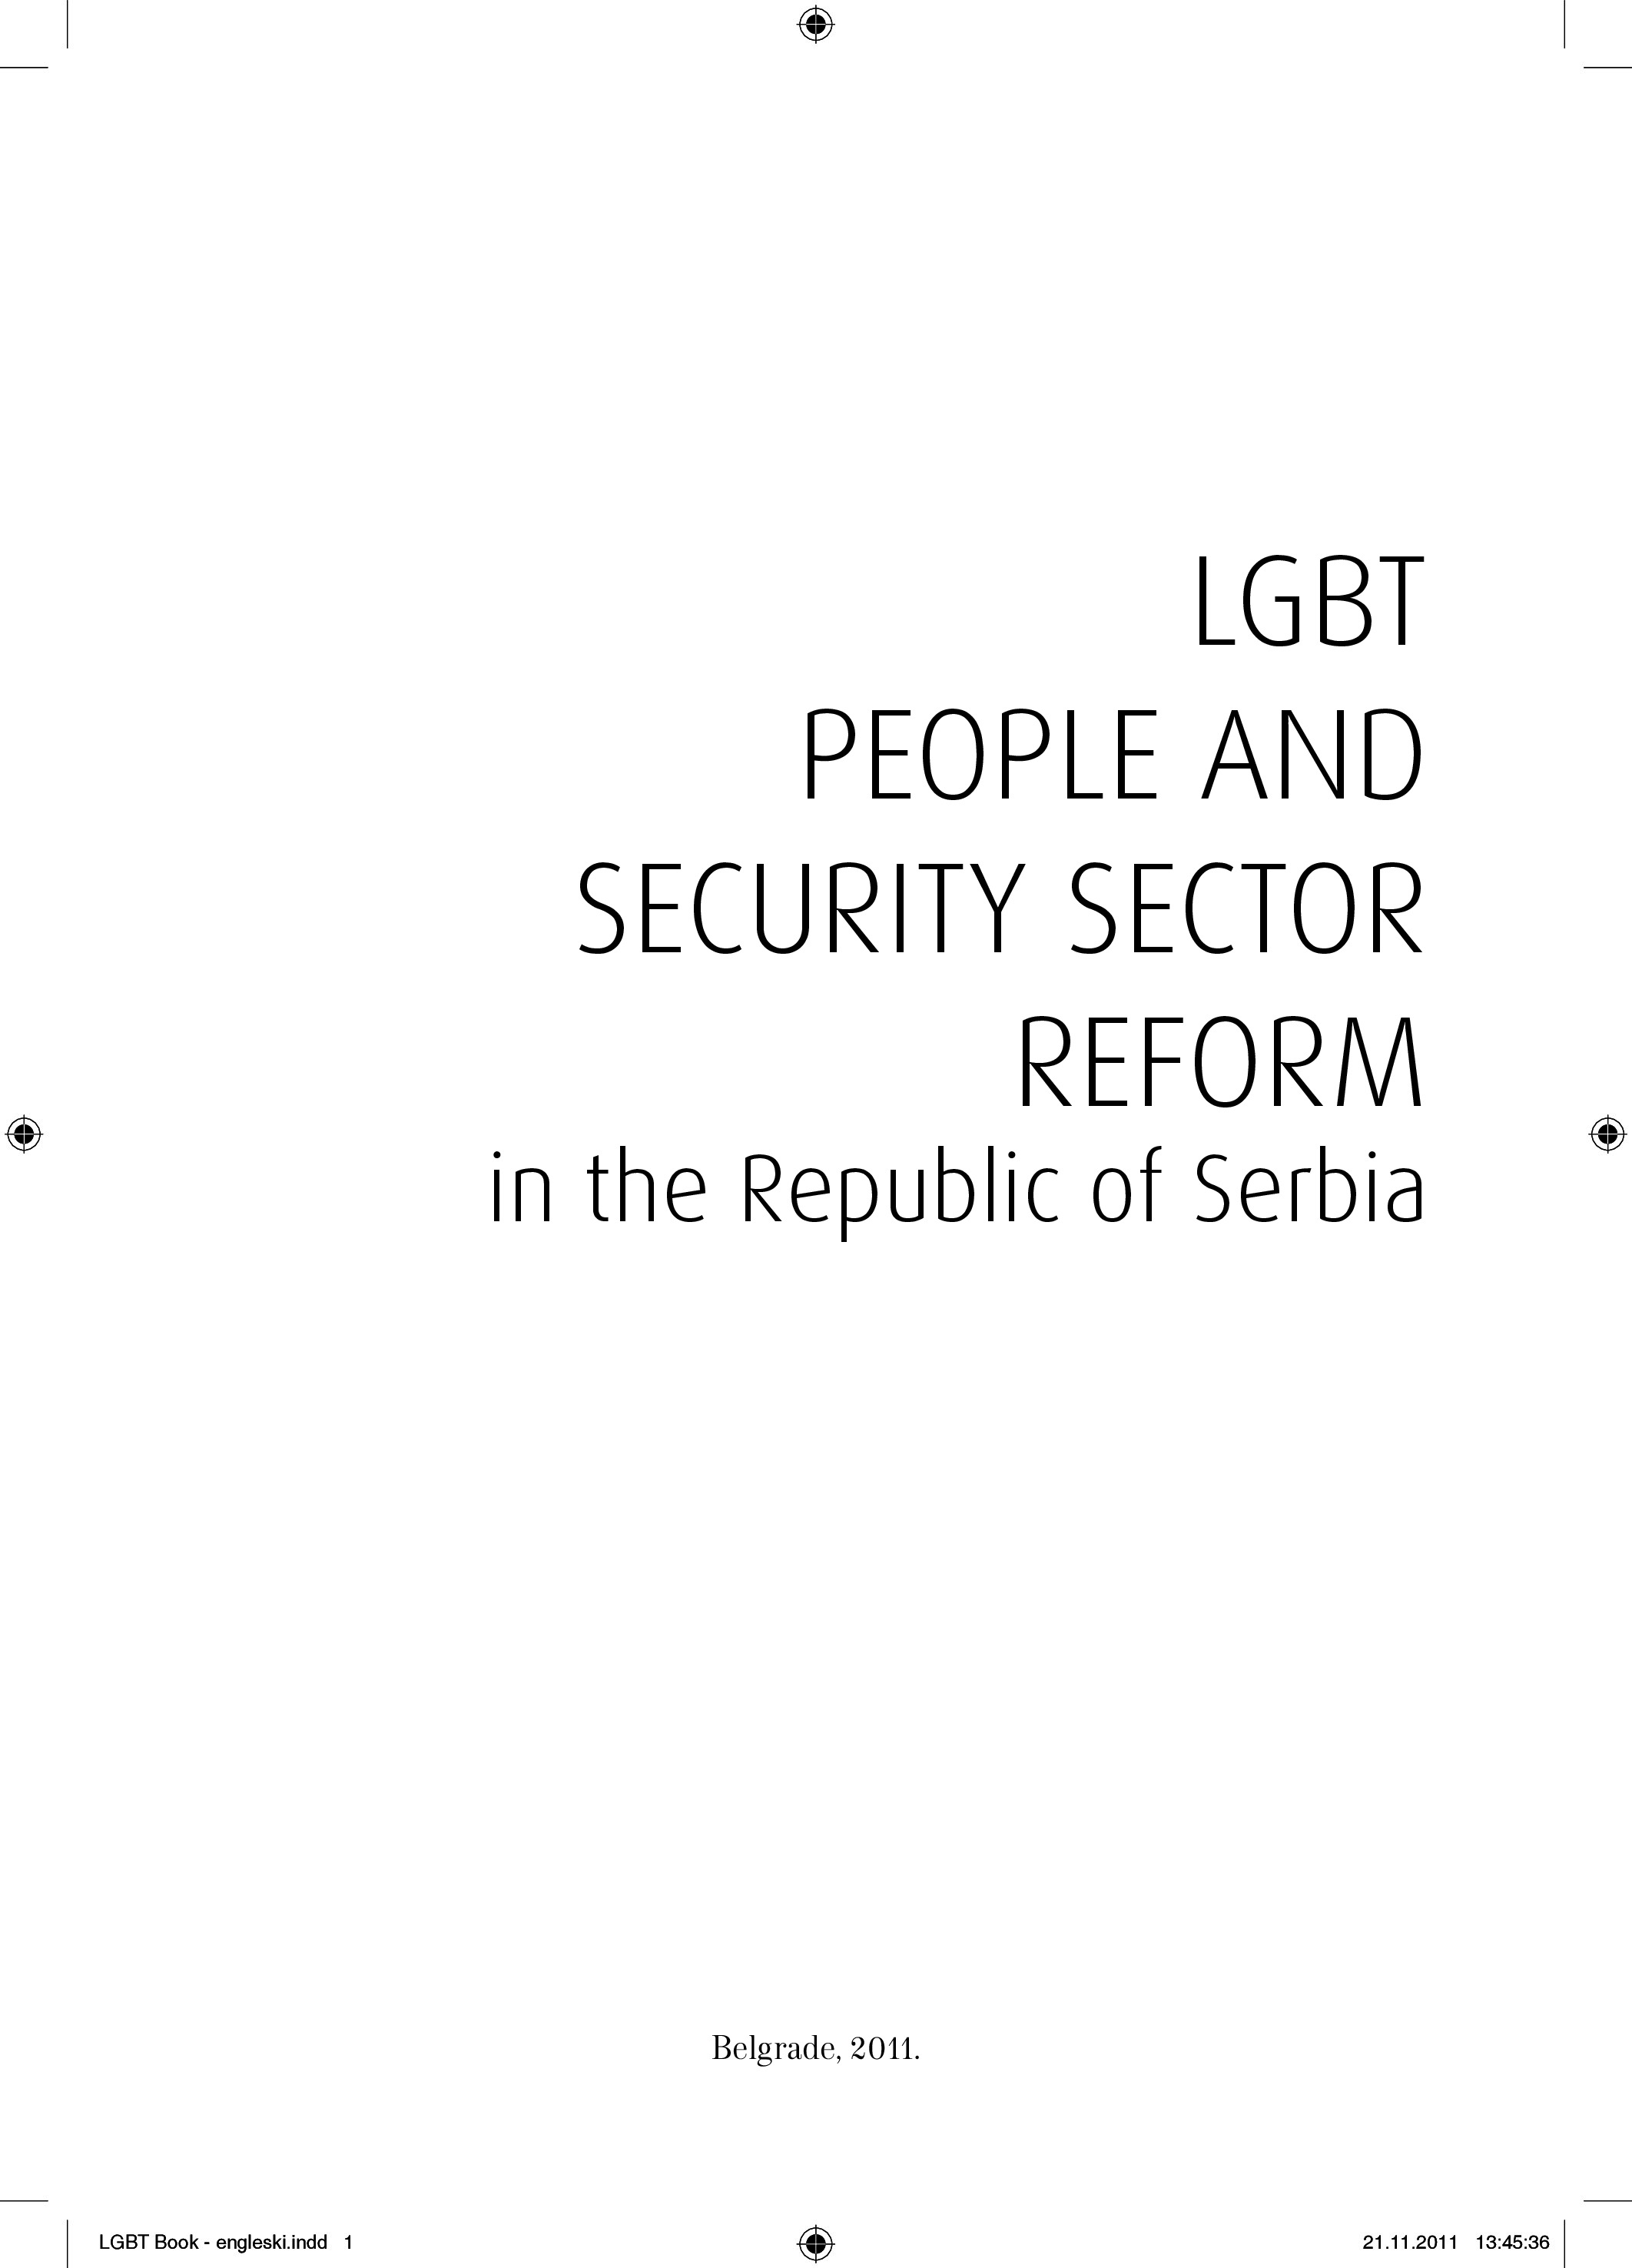 LGBT People and Security Sector Reform in the Republic of Serbia